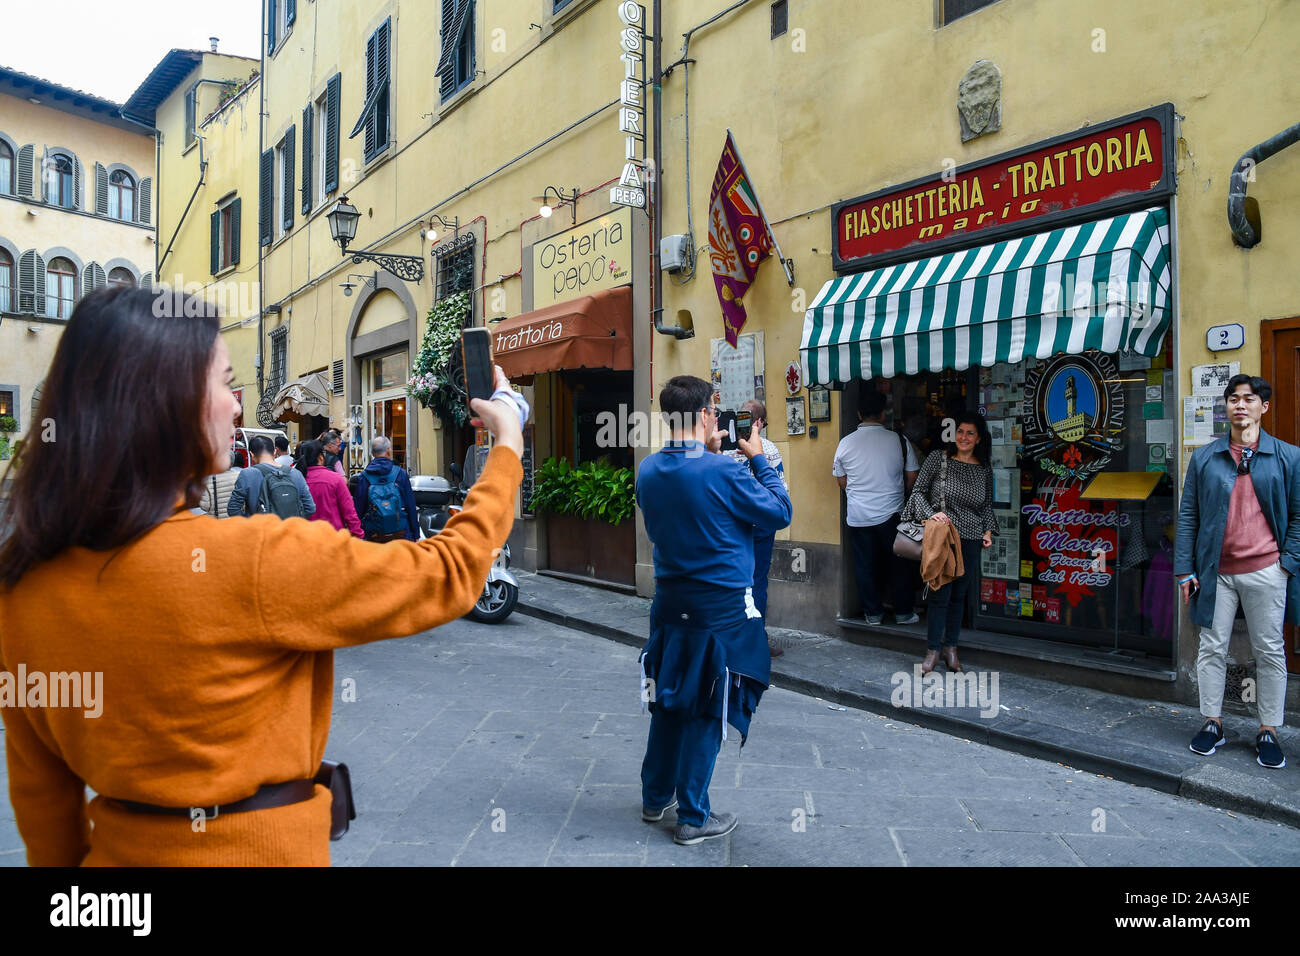 Tourists taking souvenir pictures in front of the Trattoria Mario, a famous restaurant serving typical Florentine cuisine, Florence, Tuscany, Italy Stock Photo